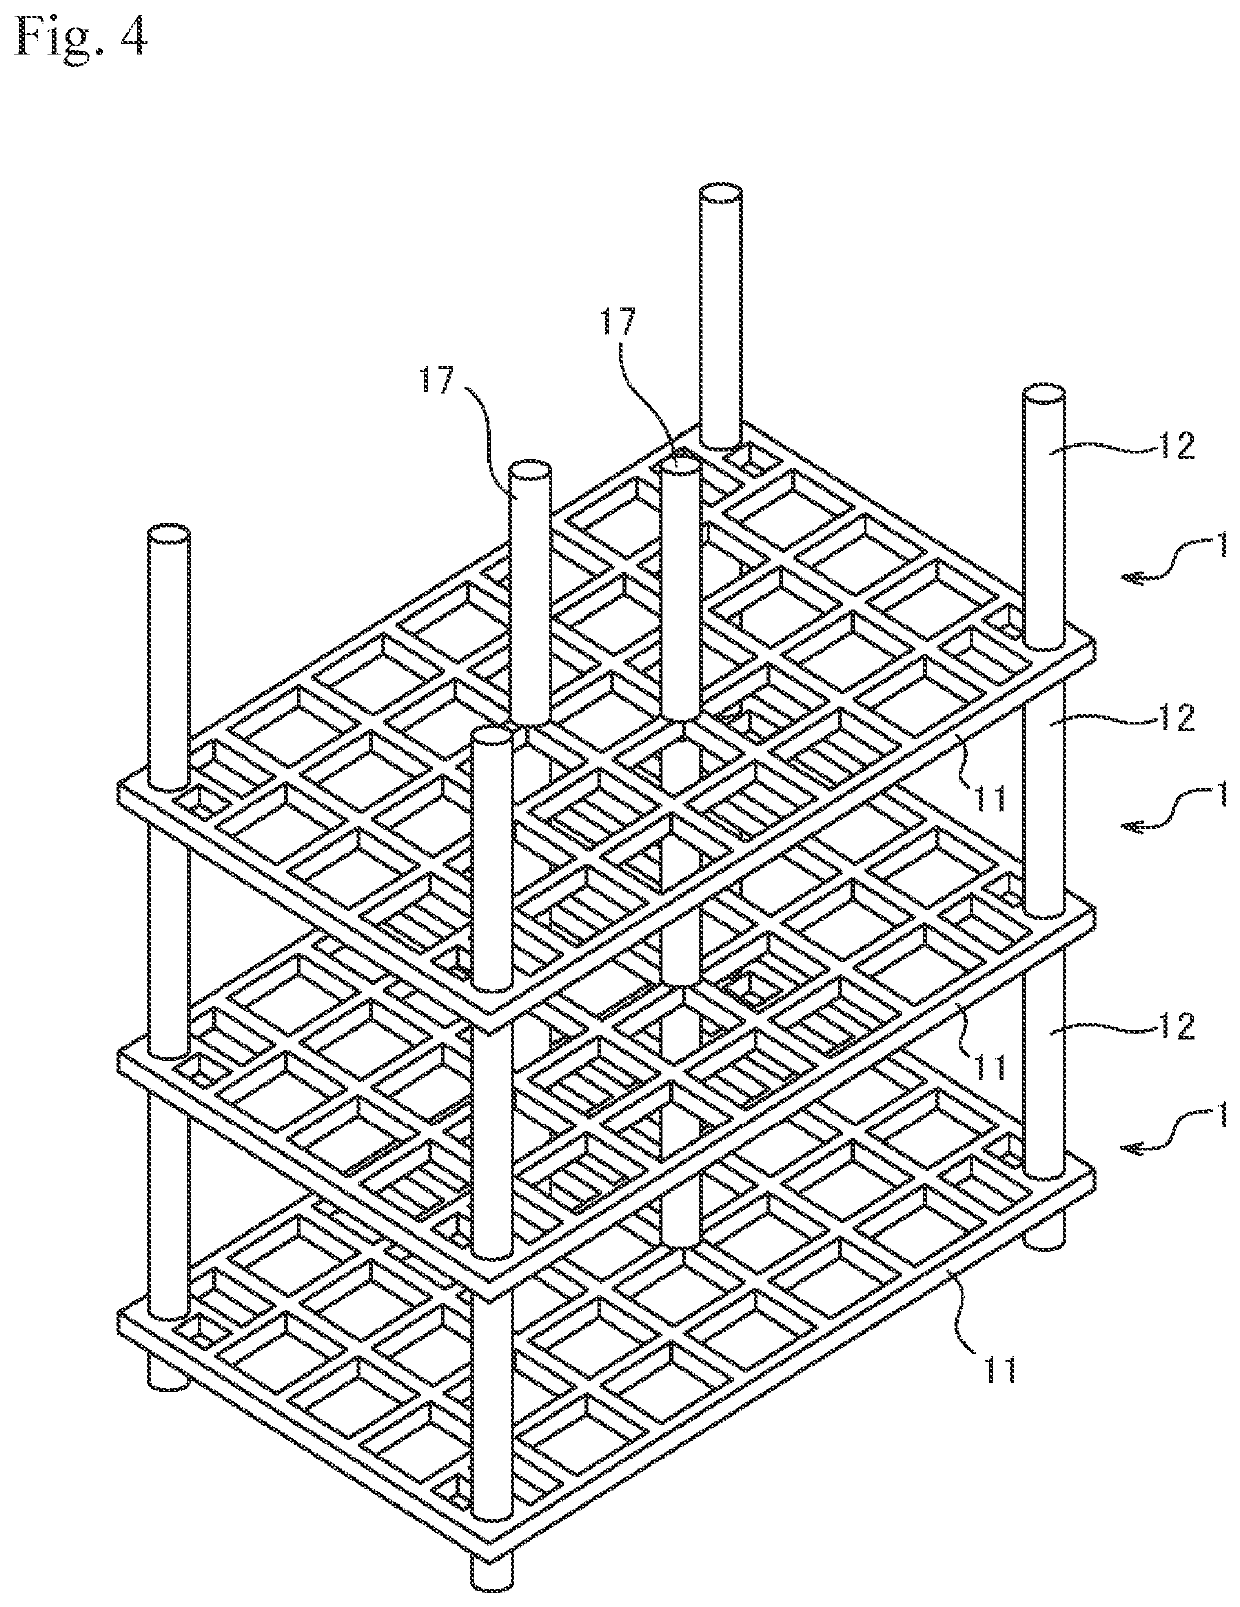 Heat-treatment tray member and heat-treatment stacked structure